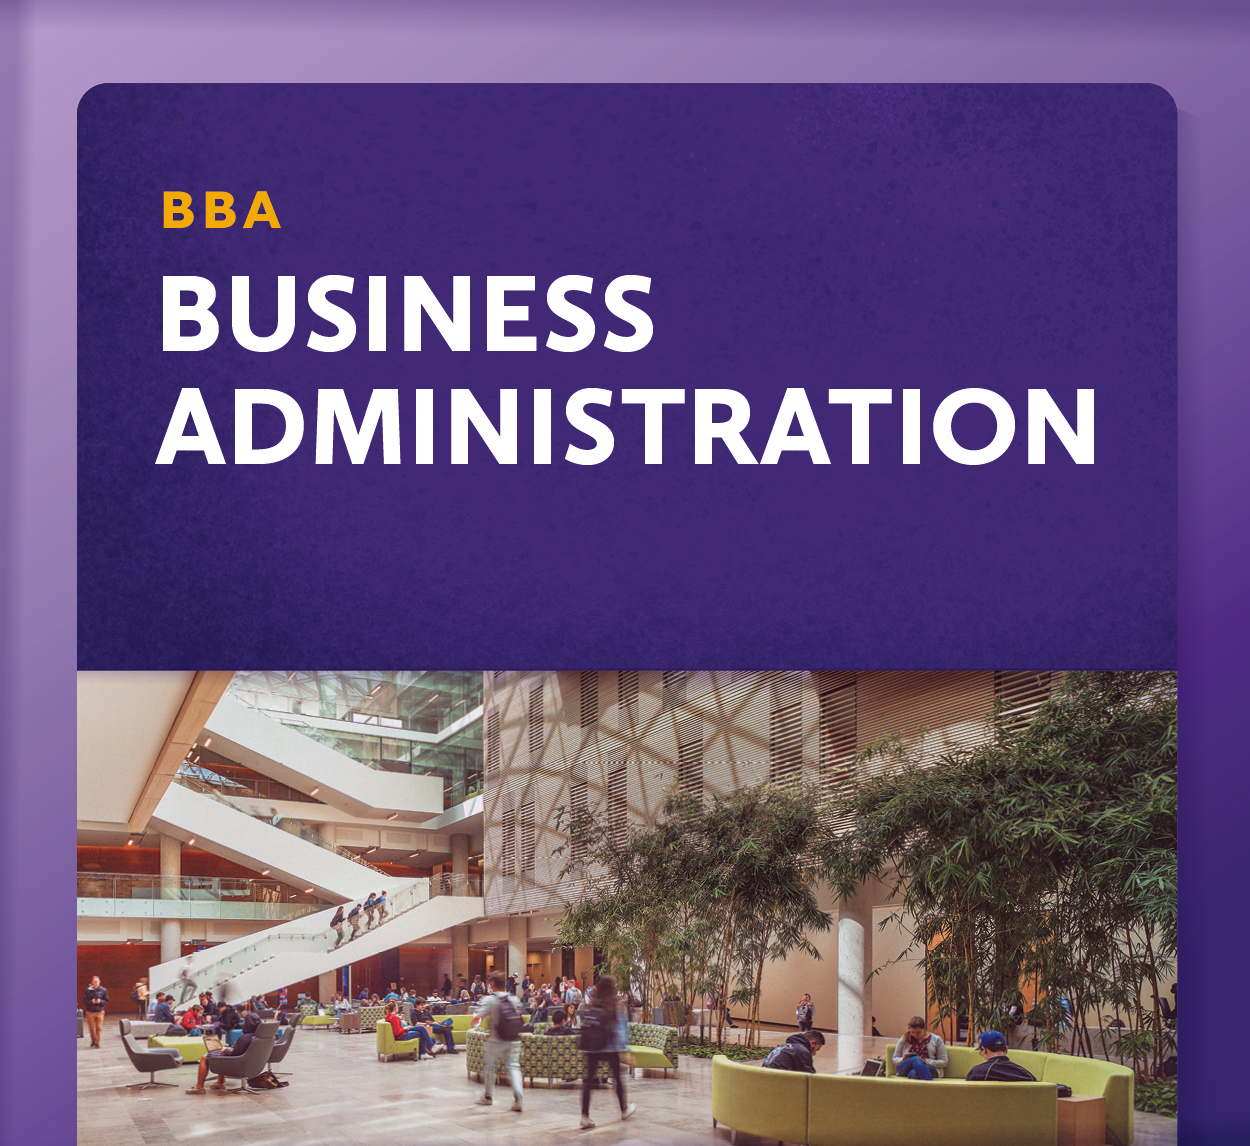 Showcase Image for Business Administration (BBA)